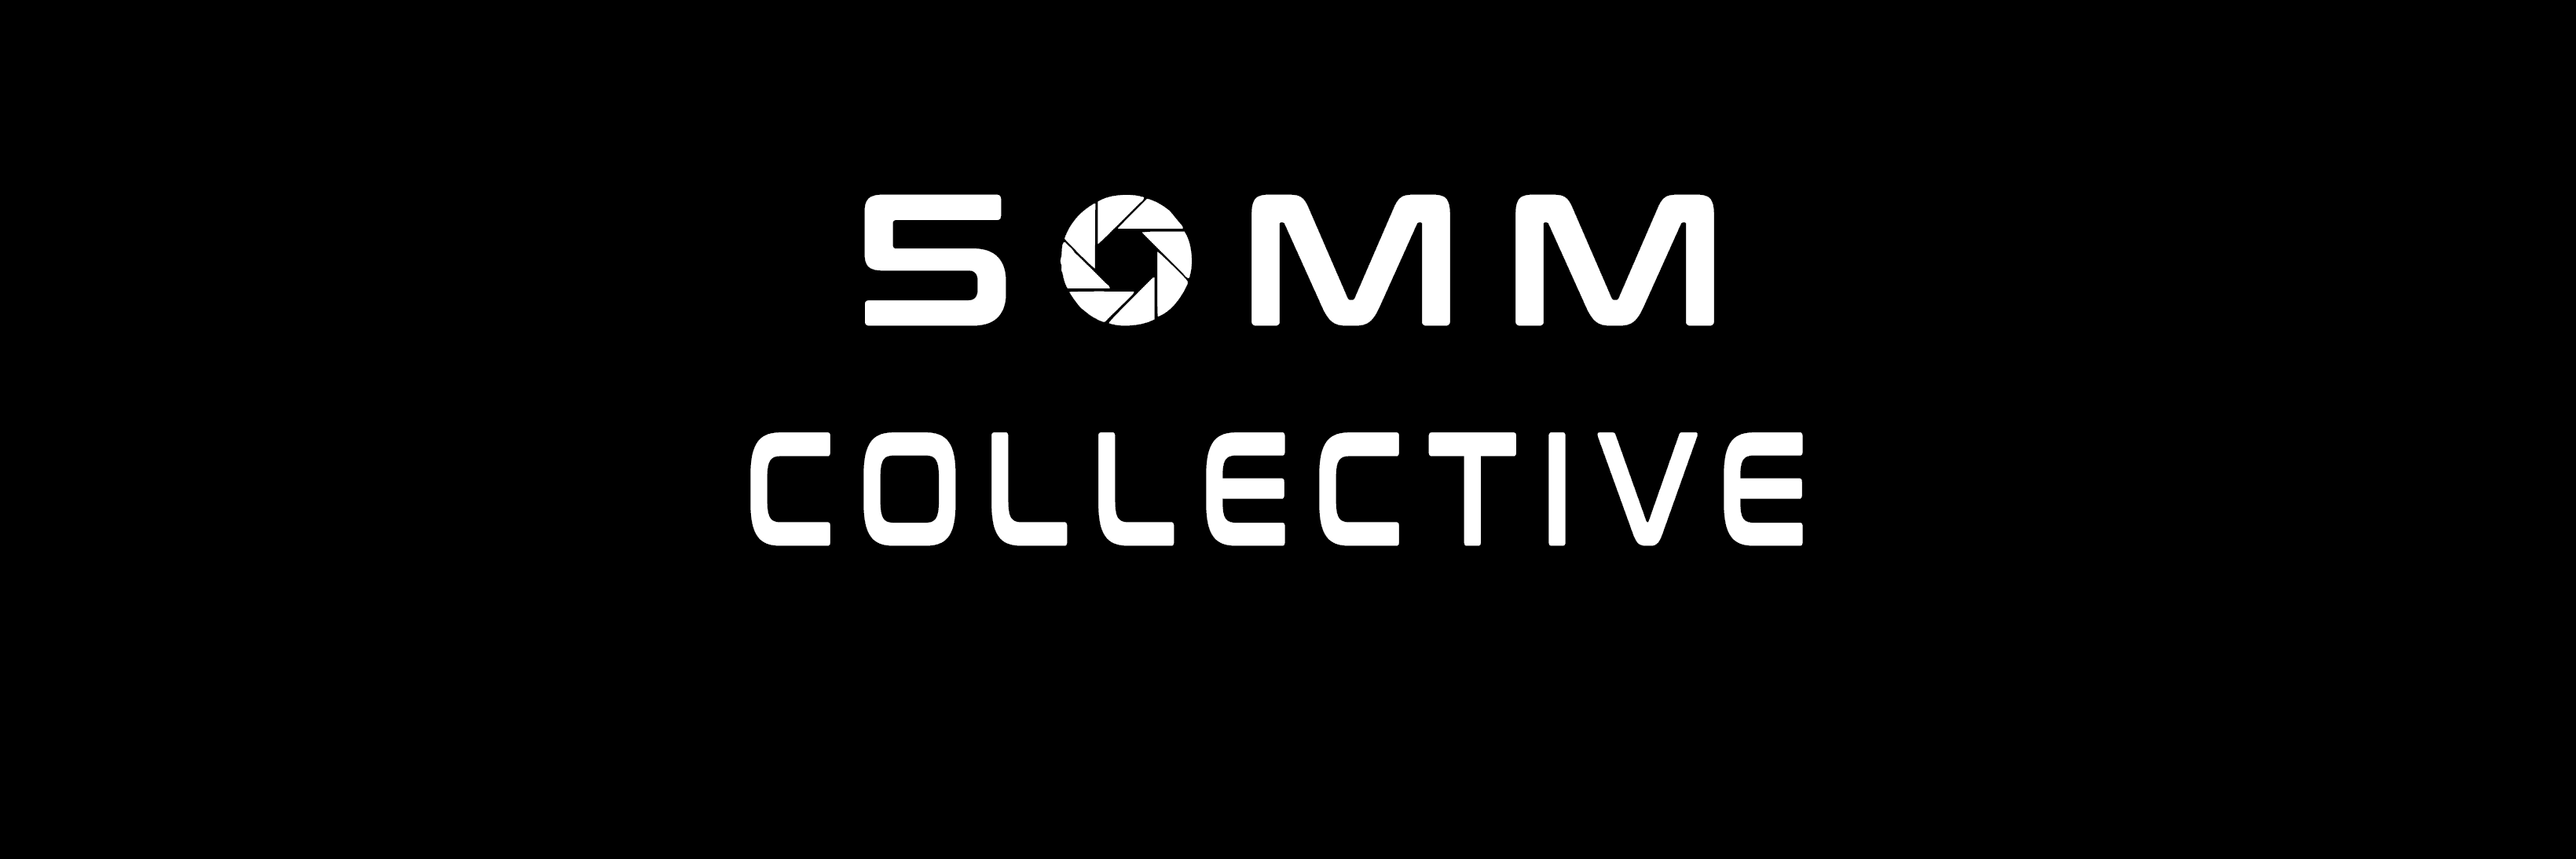 50mmcollective.eth banner